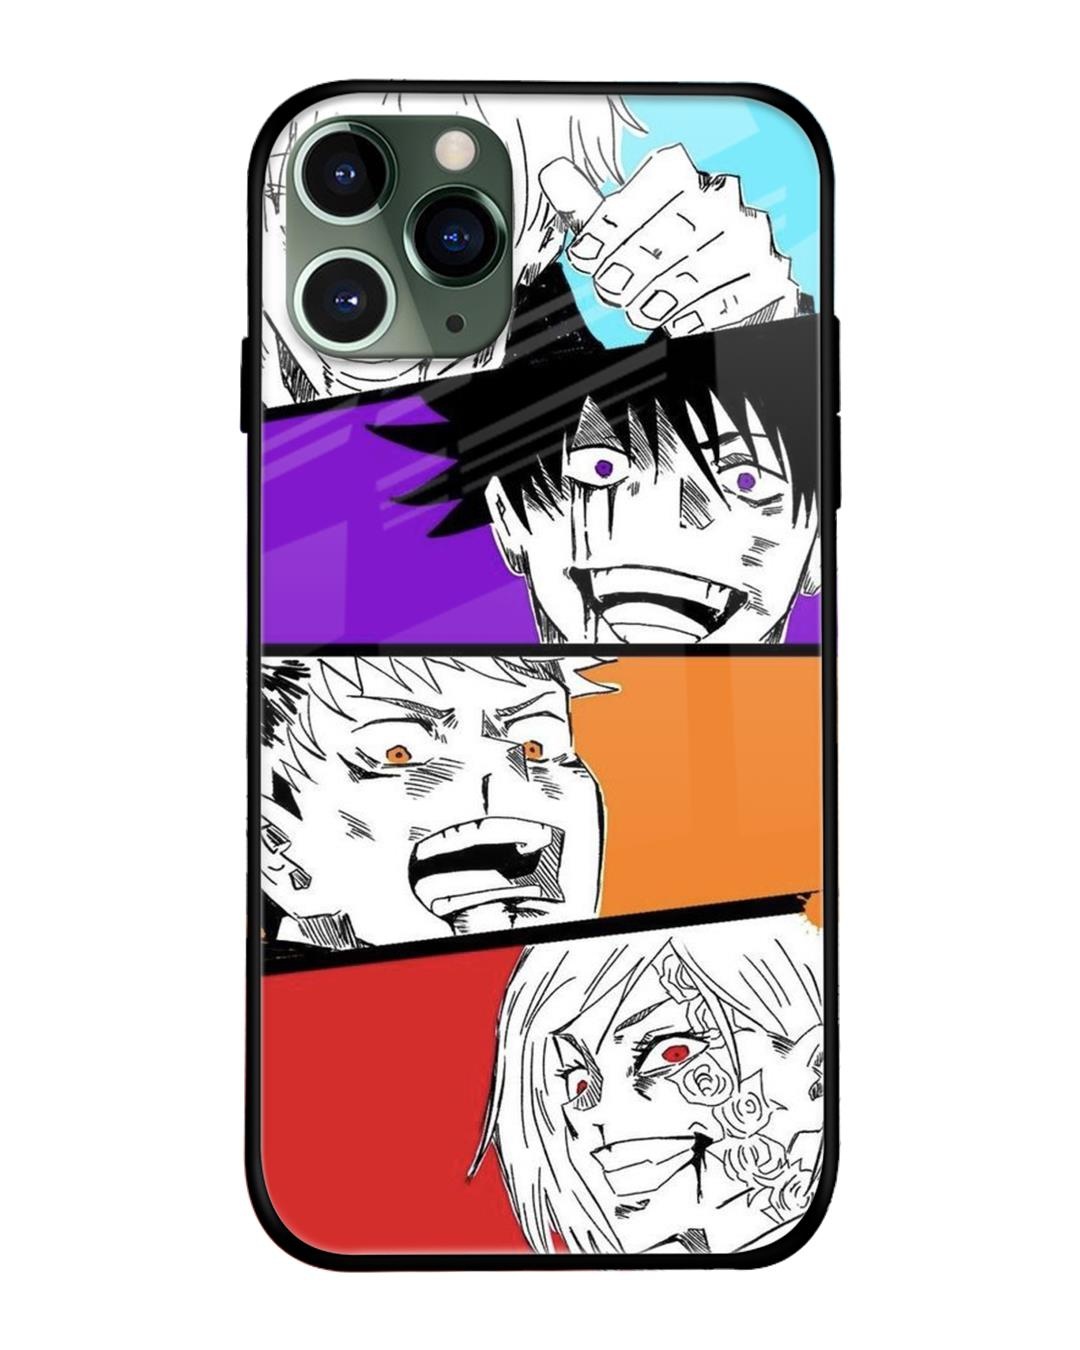 Fire Fist Ace of One Piece Anime Art Design Image Printed Black Mobile Case  Cover for iPhone Models iPhone 11 Pro Max  Amazonin Electronics